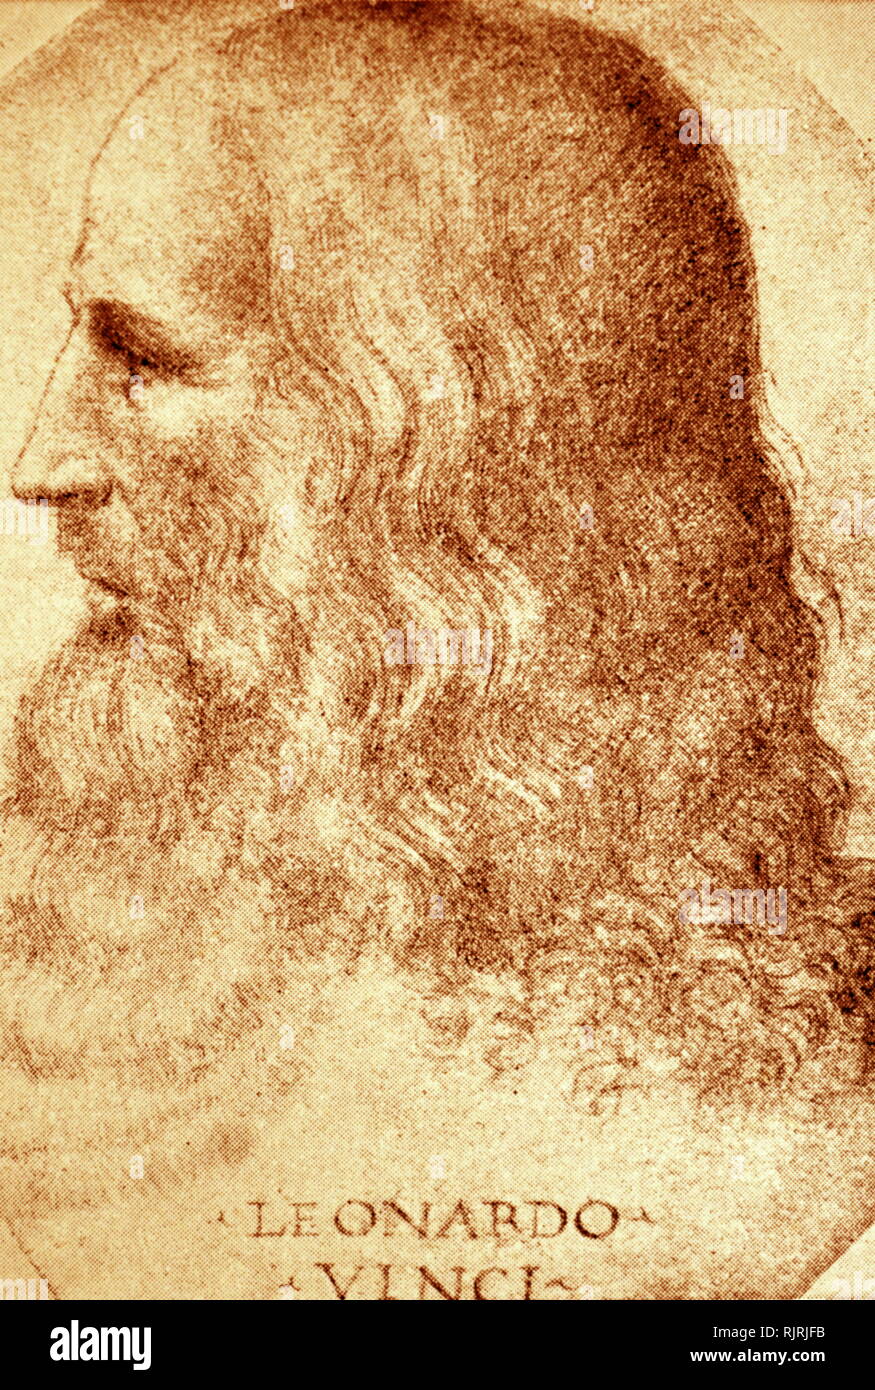 Portrait of Leonardo da Vinci; 1510. By Francesco Melzi (1491-1568); red chalk on paper. Leonardo da Vinci (1452 - 1519), Italian polymath of the Renaissance, whose areas of interest included invention, painting, sculpting, architecture, science, music, mathematics, engineering, literature, anatomy, geology, astronomy, botany, writing, history, and cartography. Stock Photo